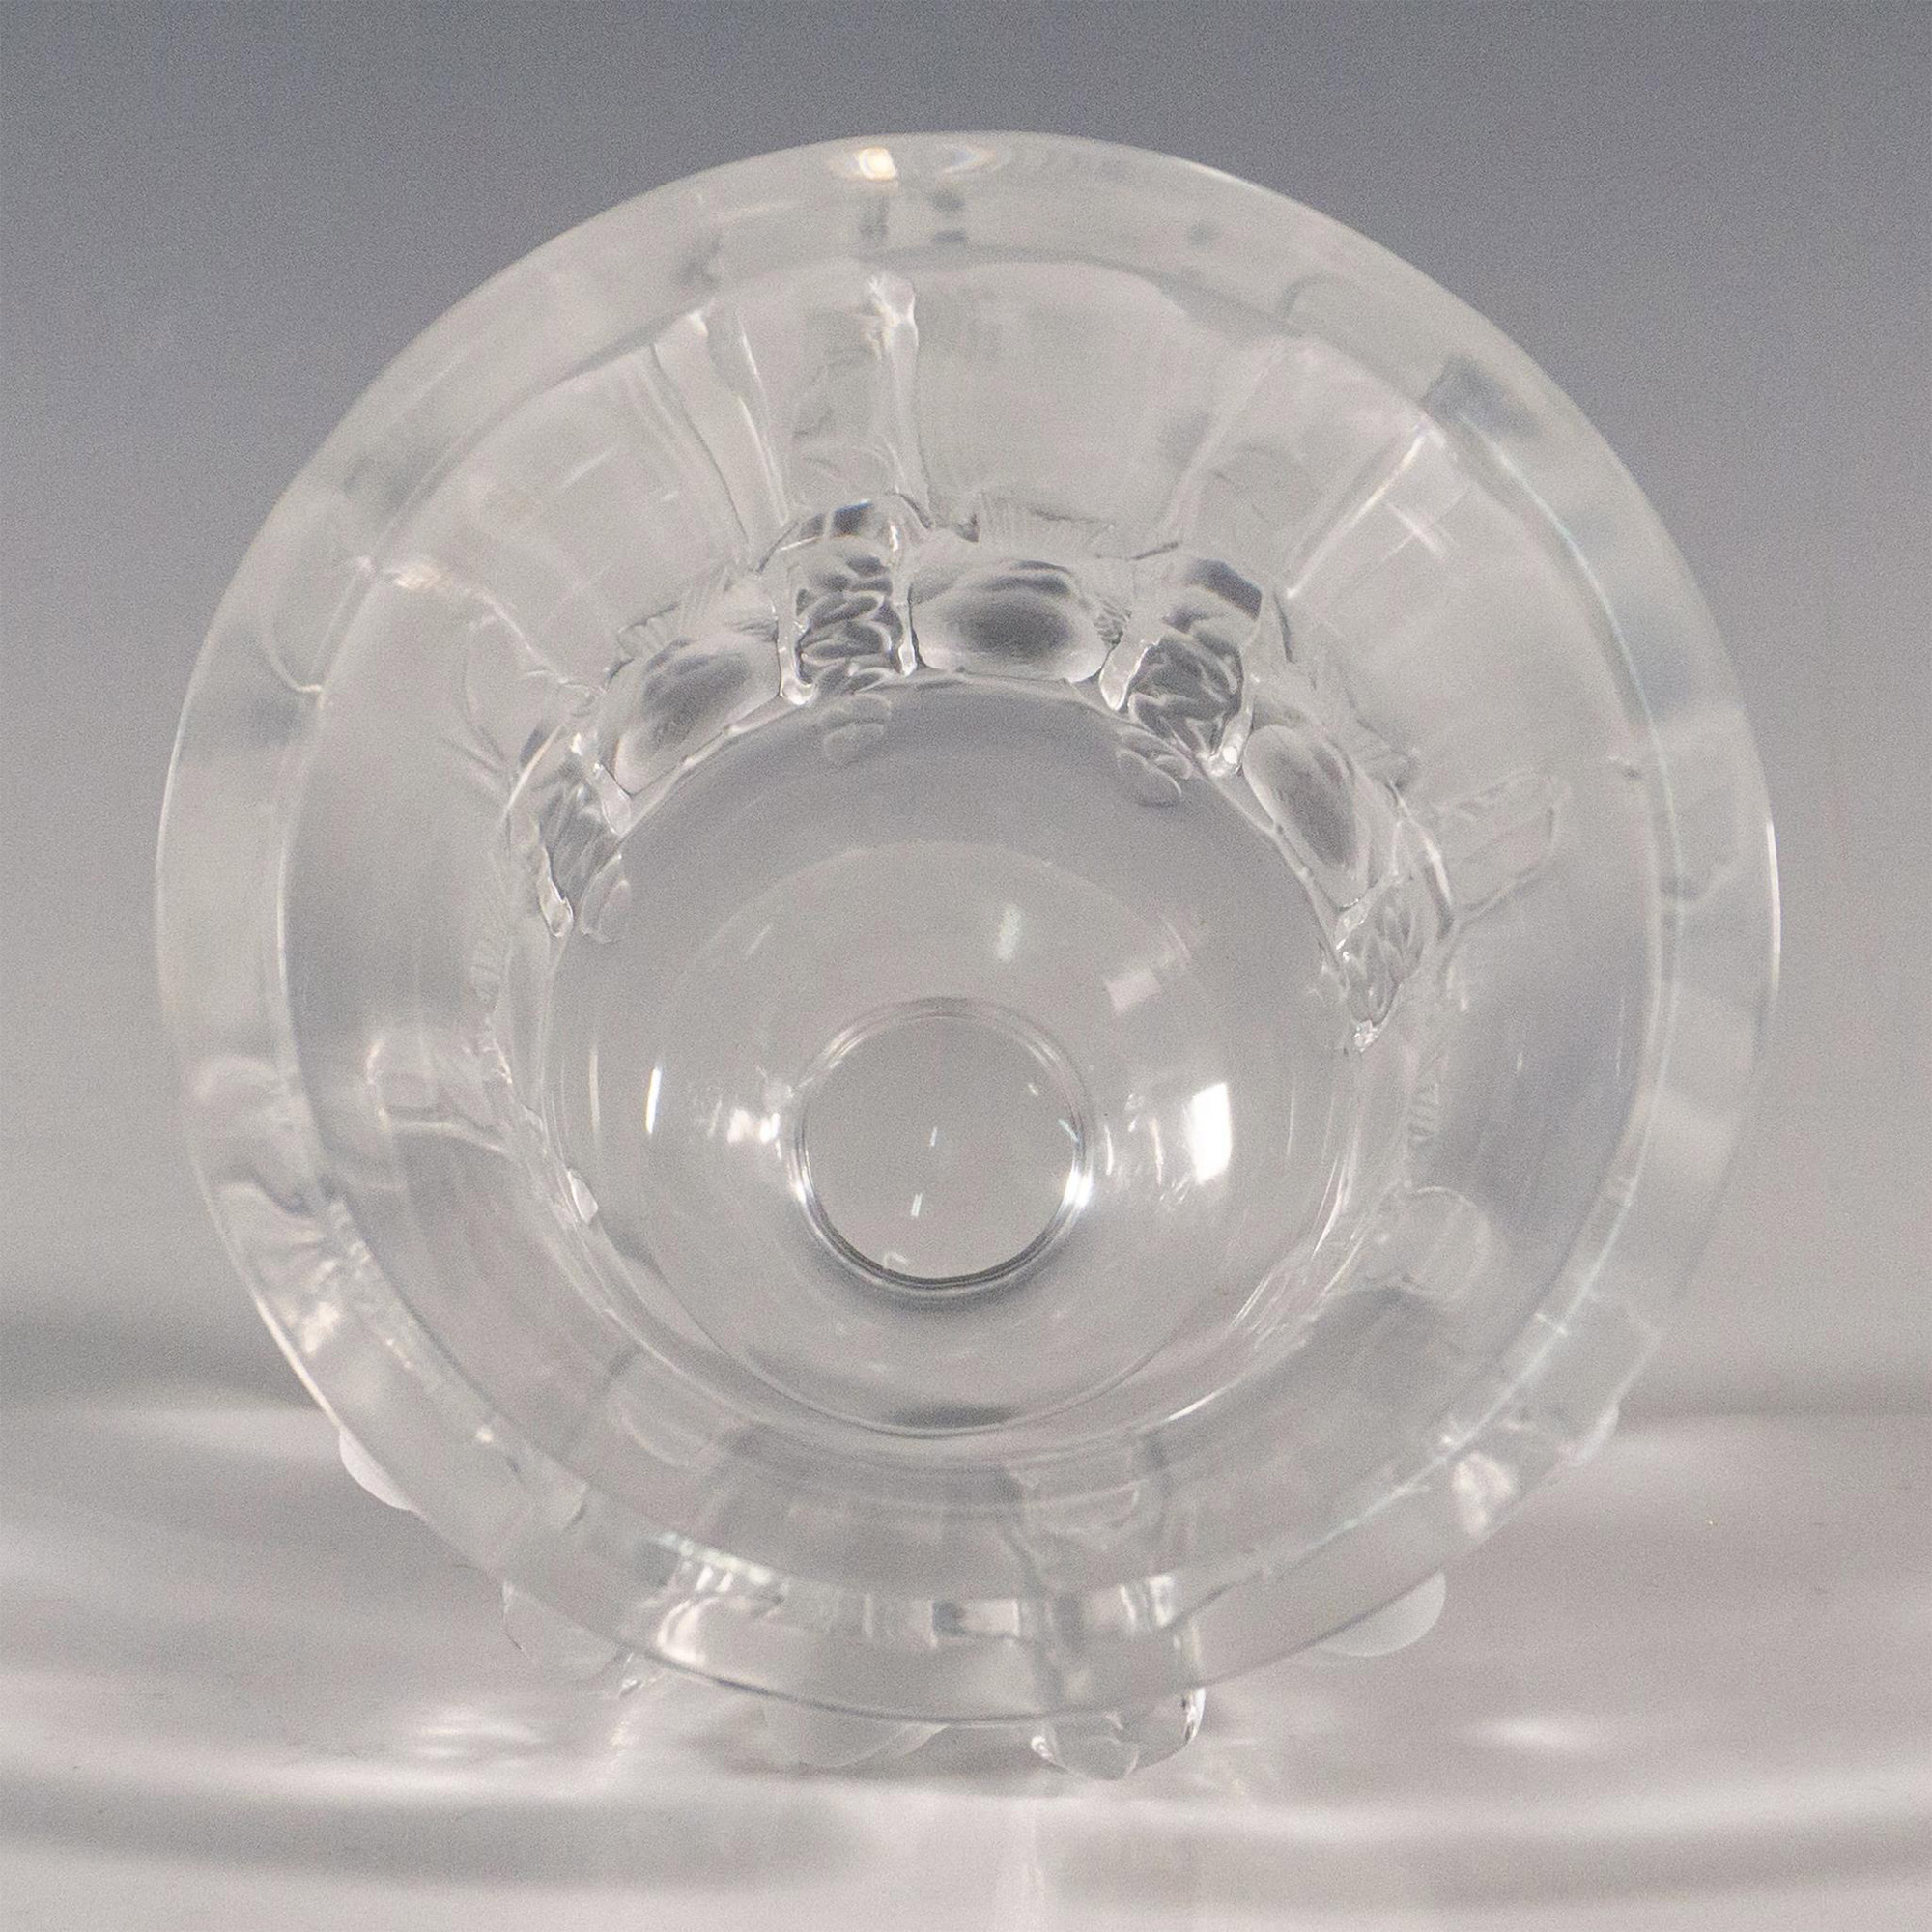 Lalique French Crystal Vase, Dampierre - Image 2 of 3